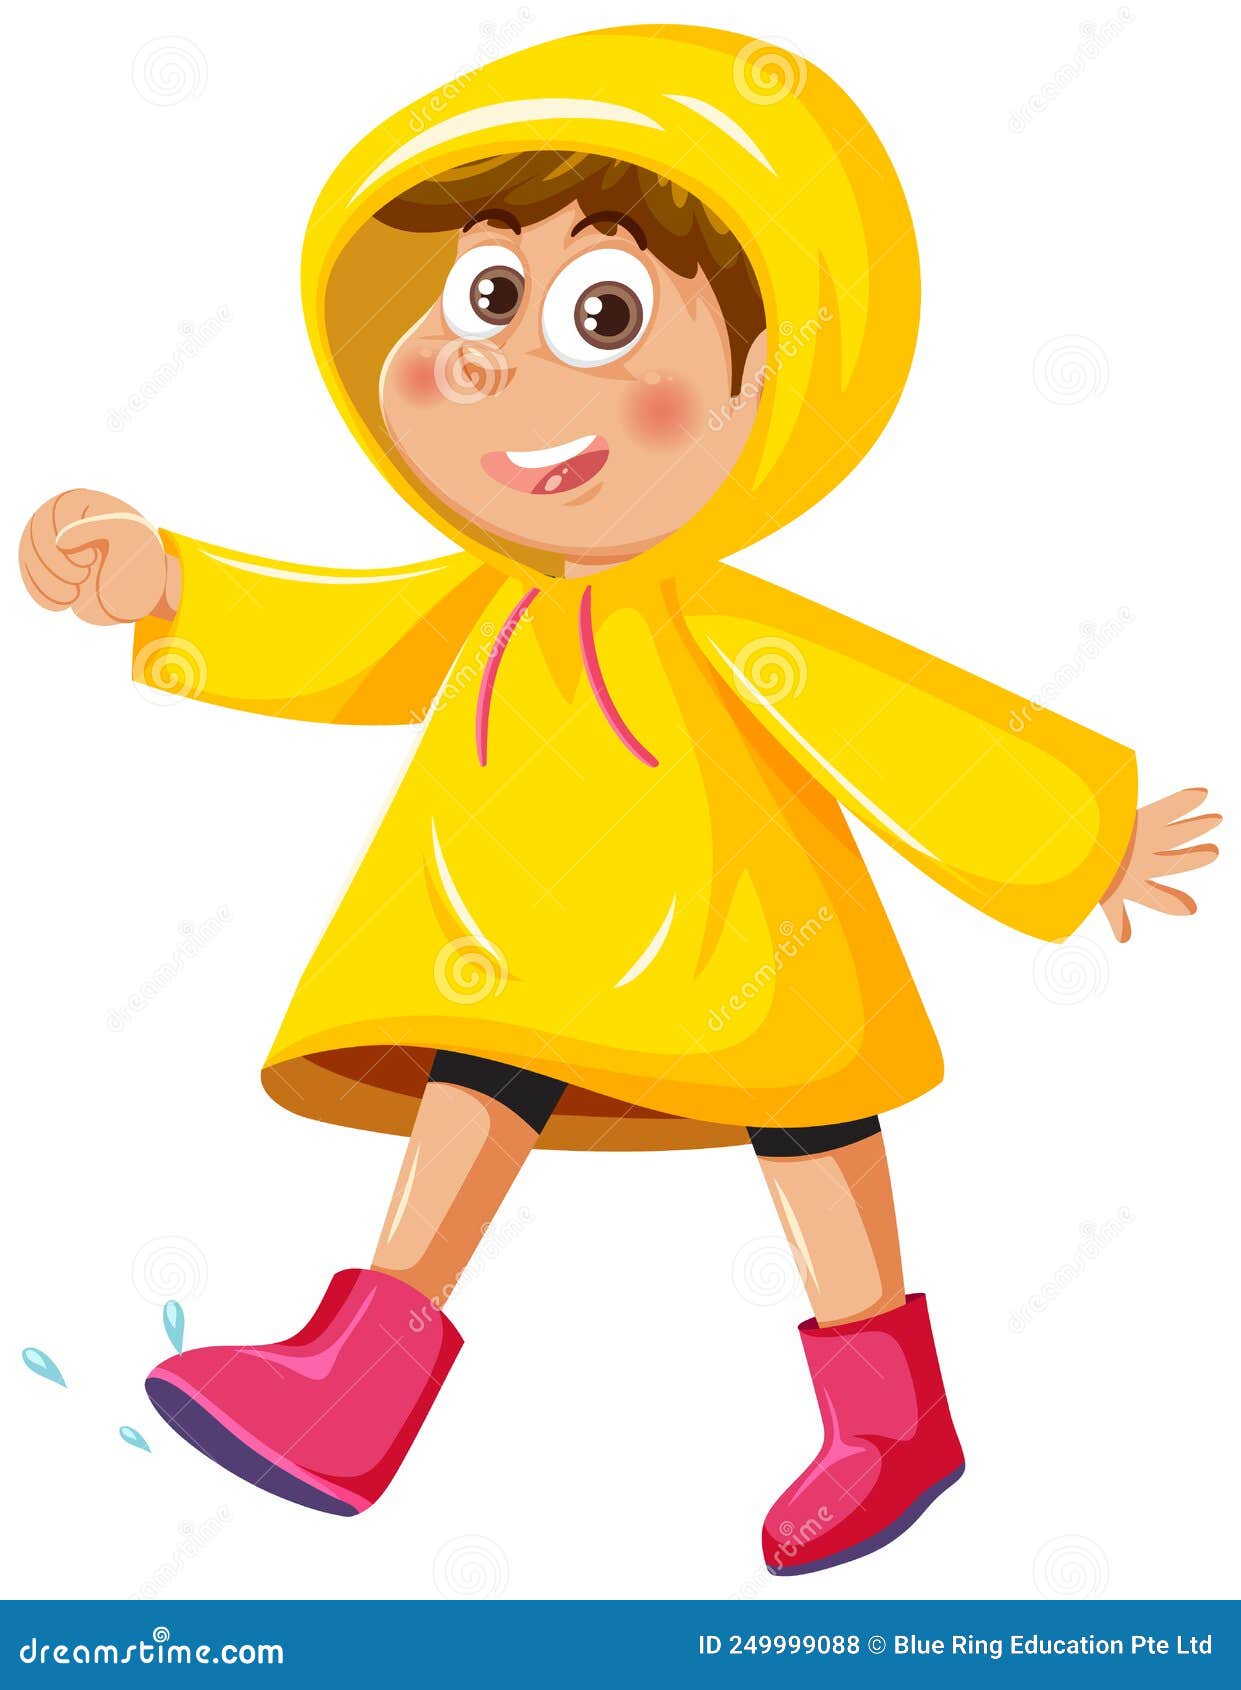 A Boy Wearing Raincoat and Boots Stock Vector - Illustration of male ...